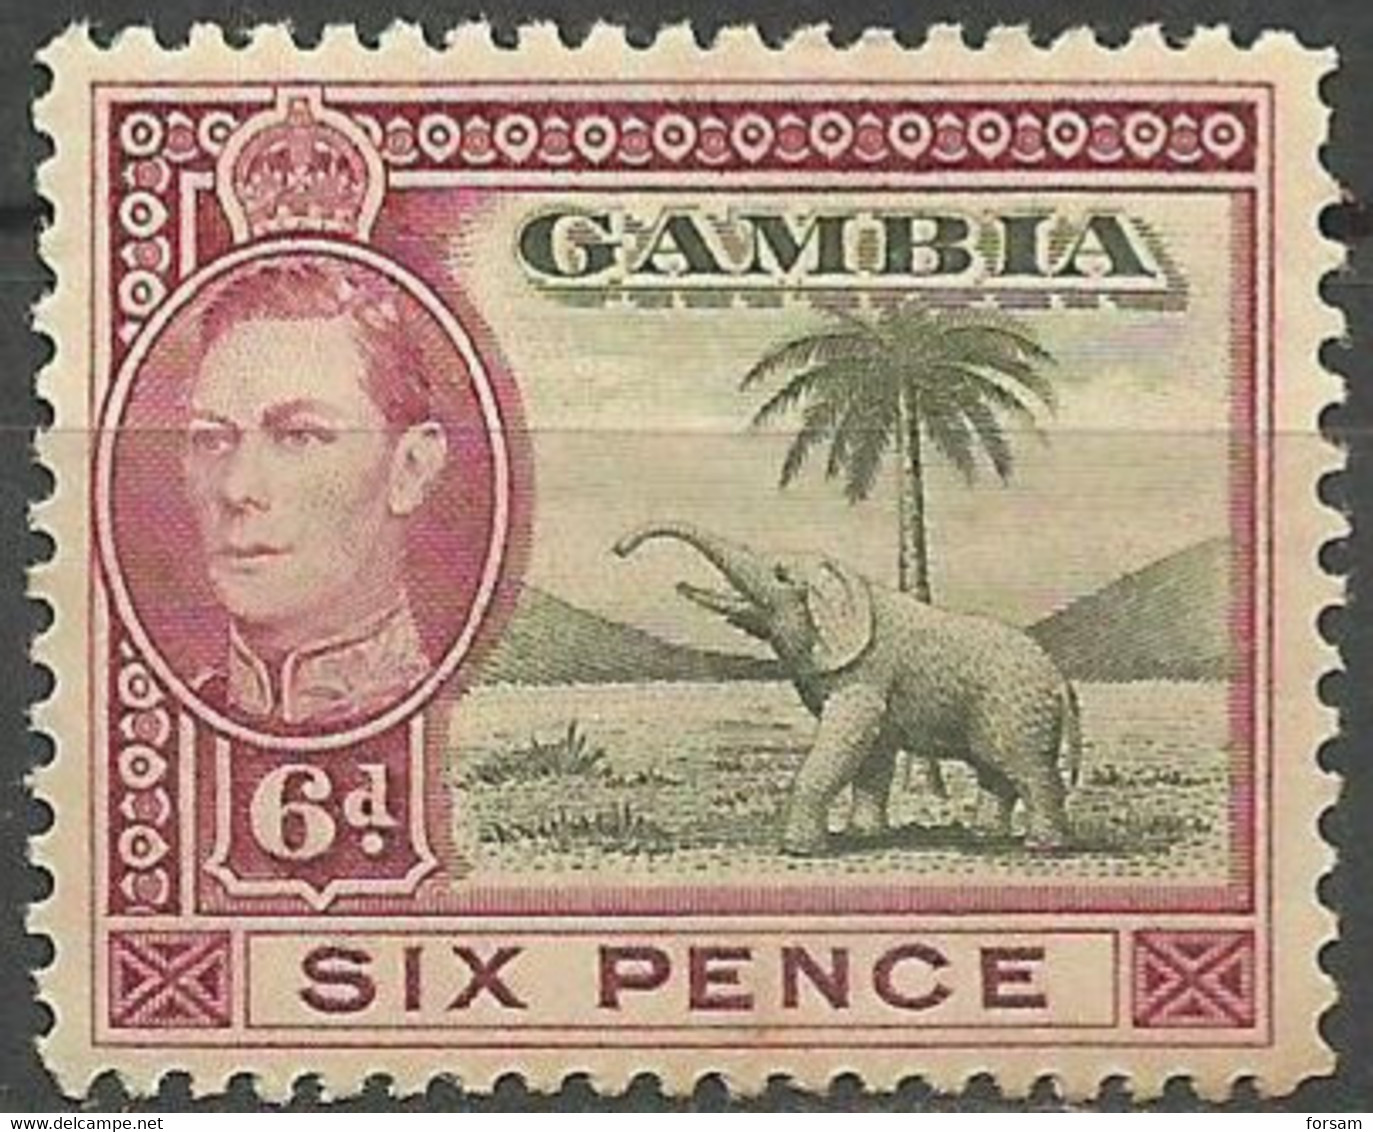 GAMBIA..1938..Michel # 131...MH. - Gambia (...-1964)